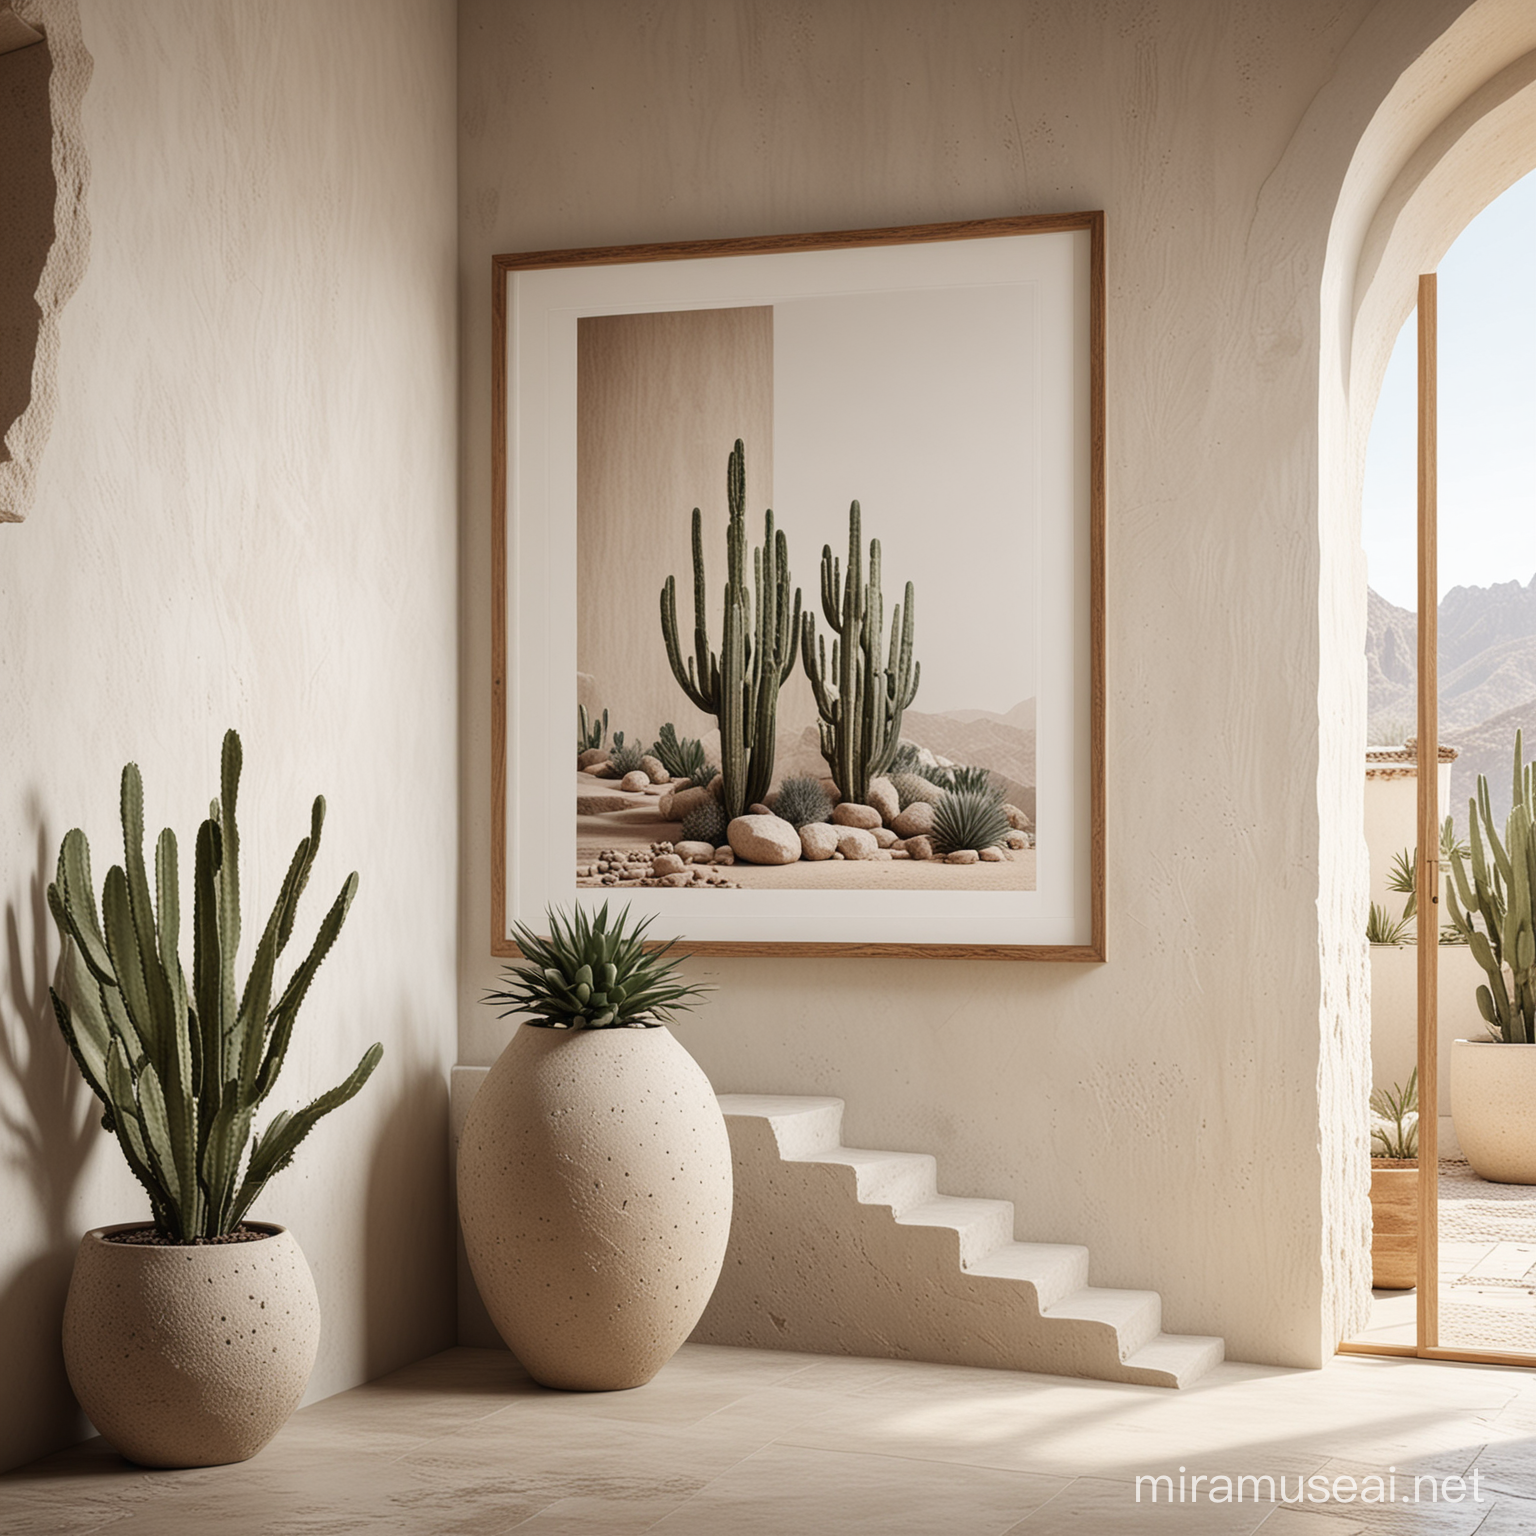 A gorgeous white lemon wash wall contemporary close up framed white poster mockup with a minimal but rustic interior design including stairs and entrance hall, huge stone elements, including a contemporary Wabi Sabi huge vase in white sand finish as decoration with huge cactus, huge windows in the magazine style of ARCHITECTURAL DIGEST, a high quality architectural visualization, using 3D modeling software with photorealistic materials and advanced lighting techniques to showcase the intricate details and modern look of the room